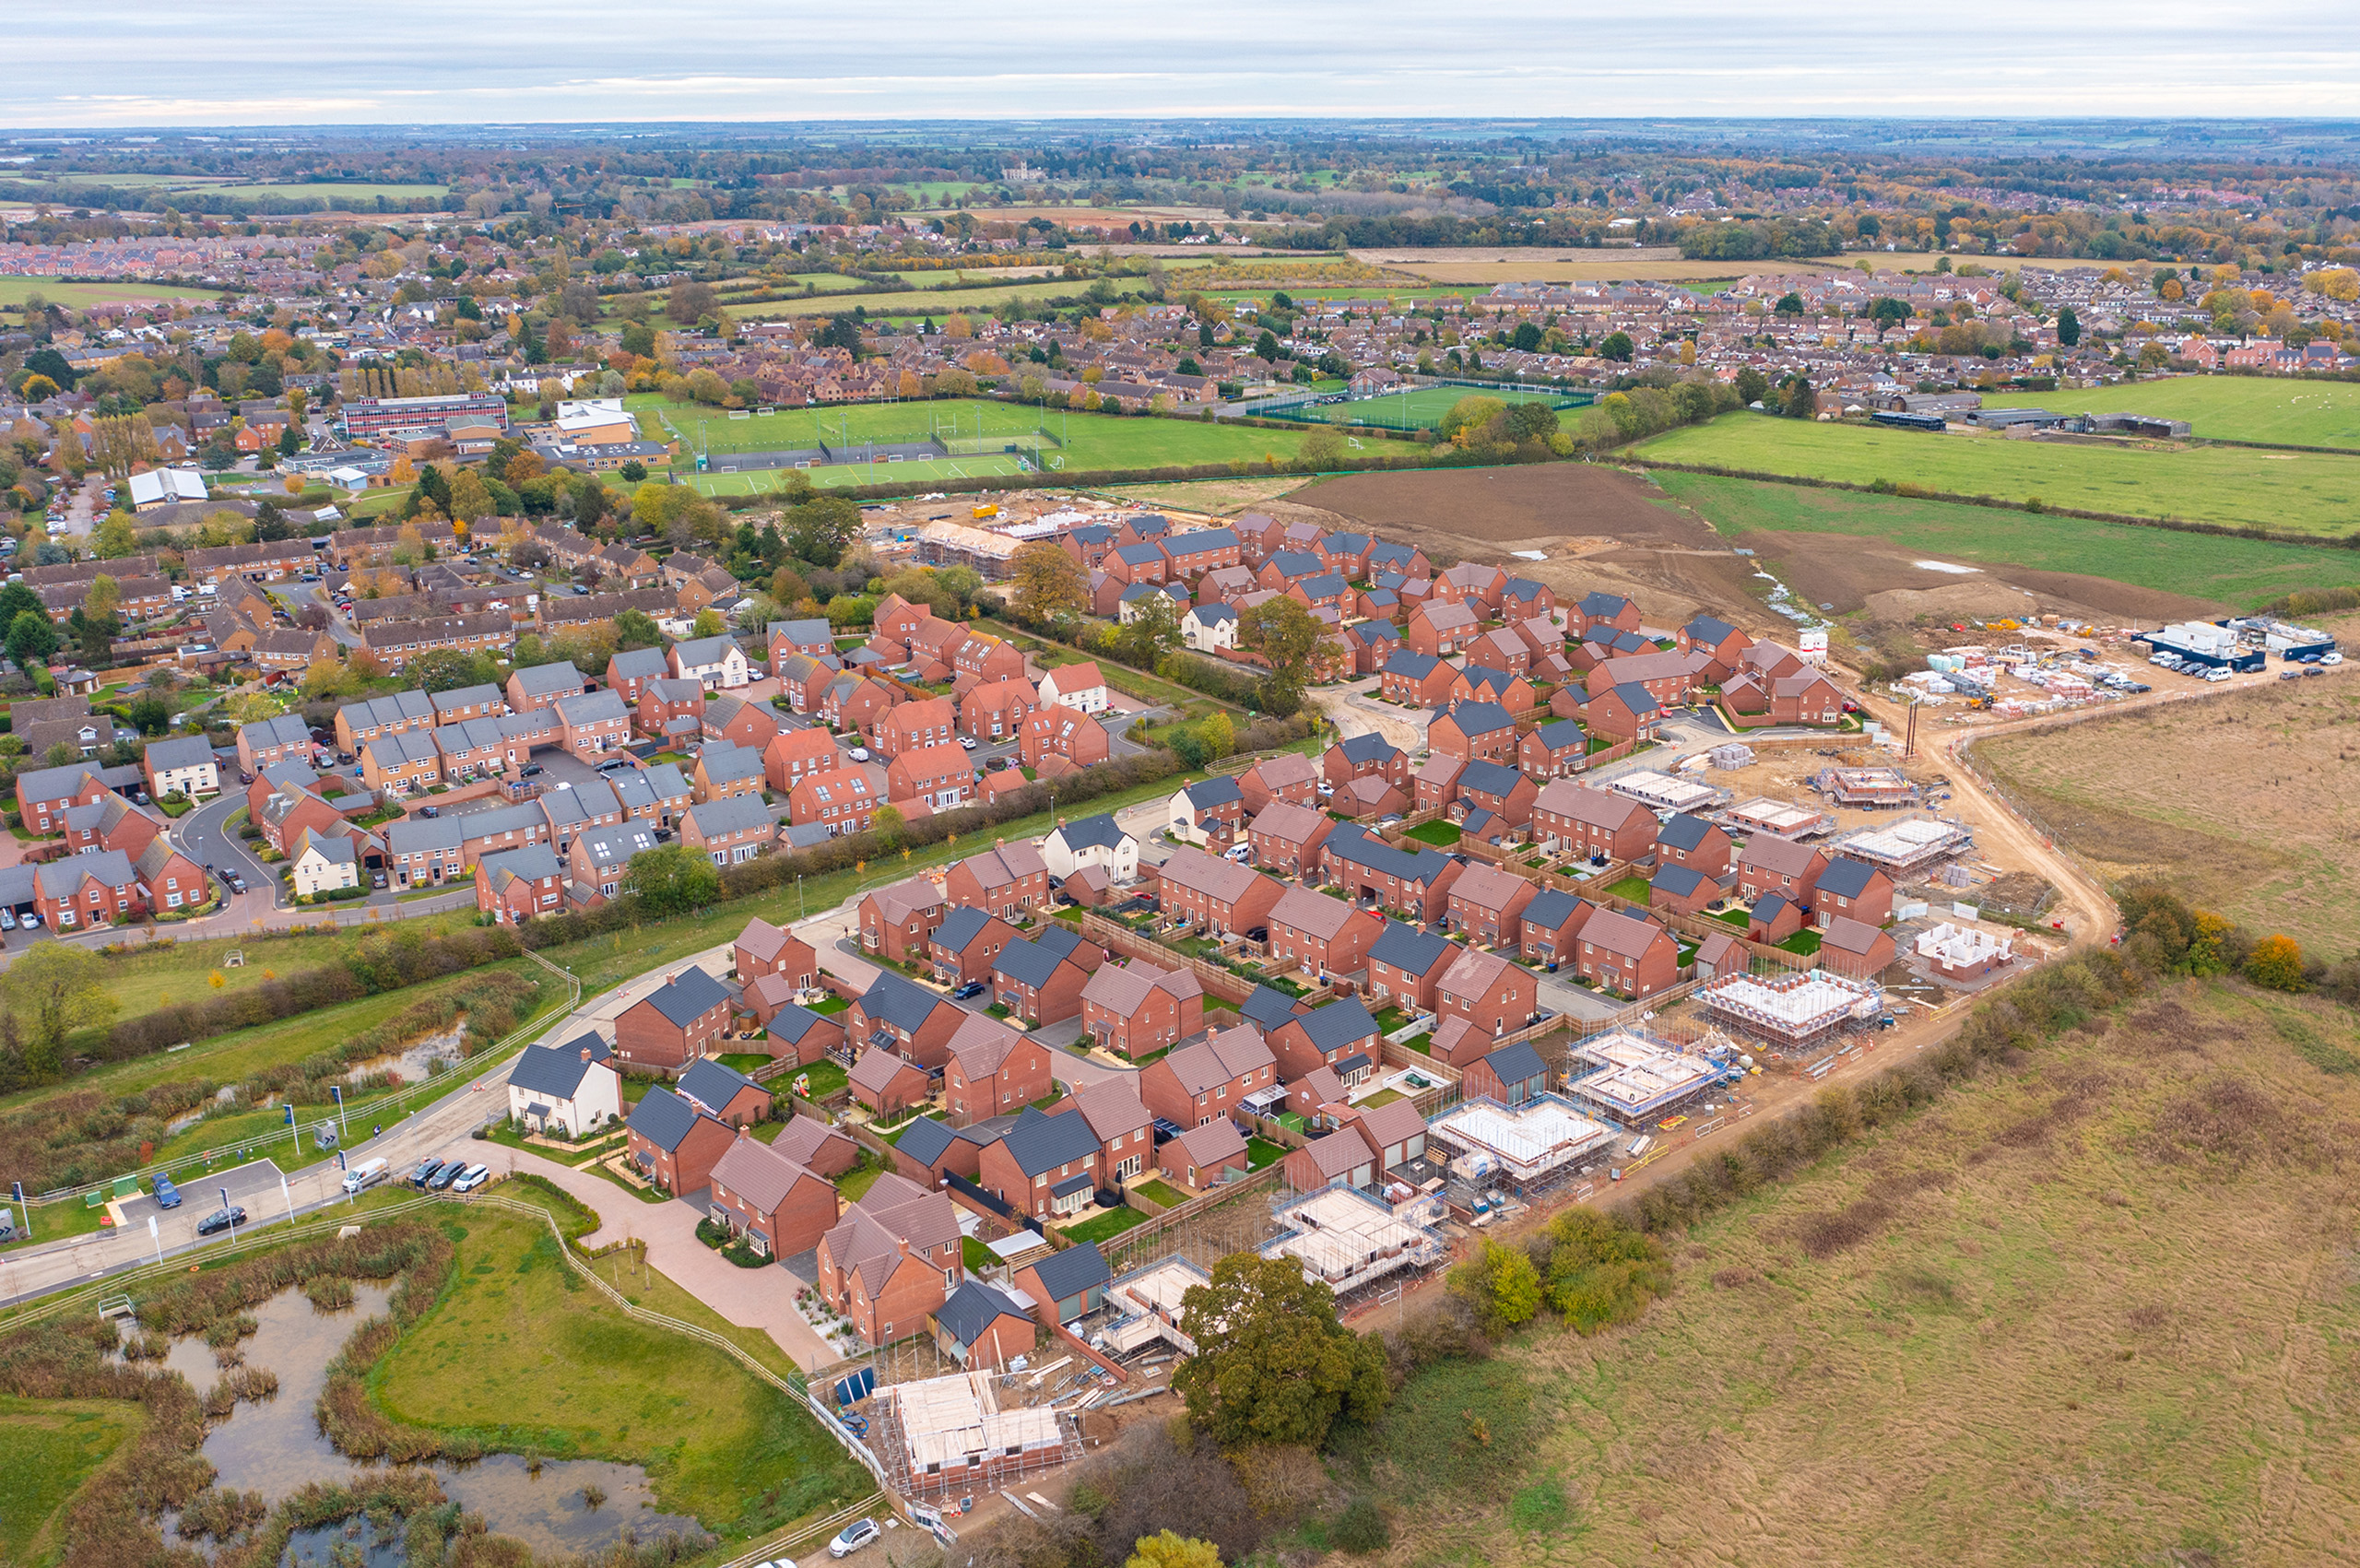 Development of new homes, promoting land through planning. Aerial view.